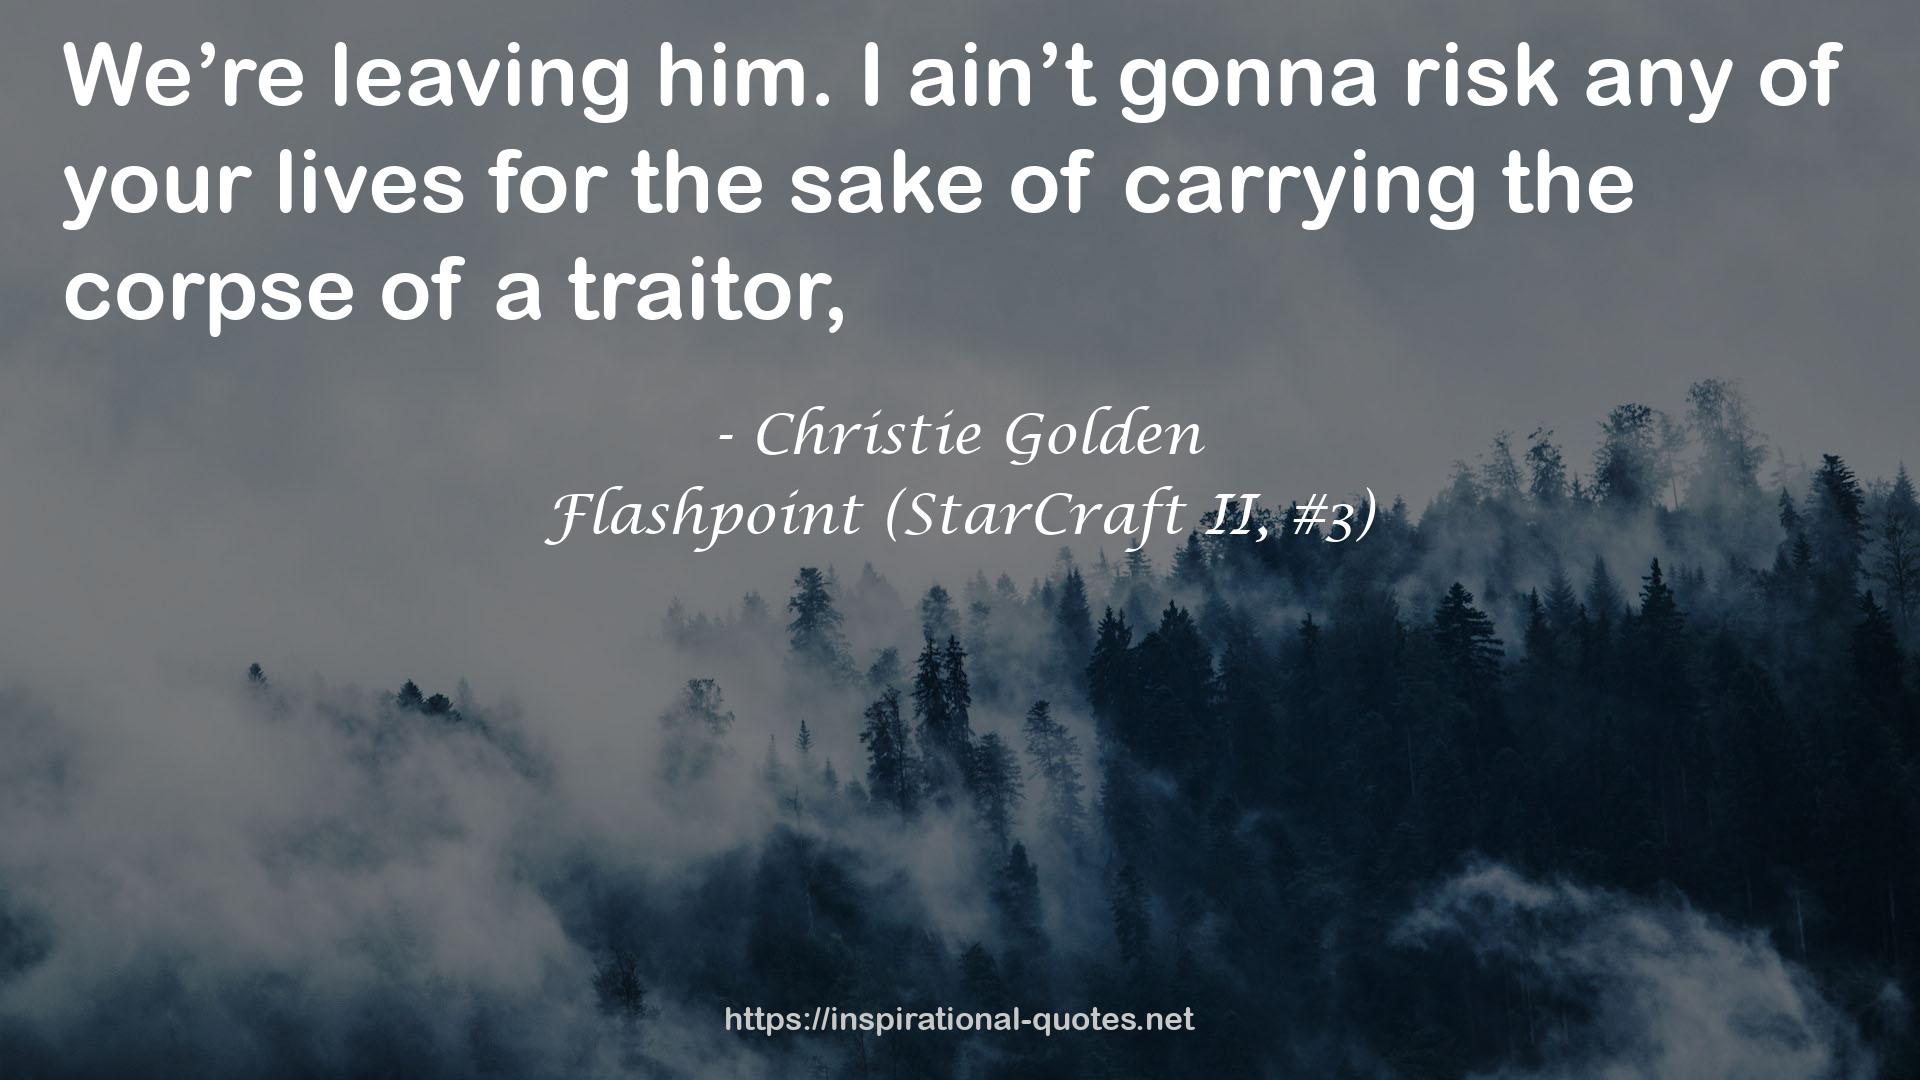 Flashpoint (StarCraft II, #3) QUOTES